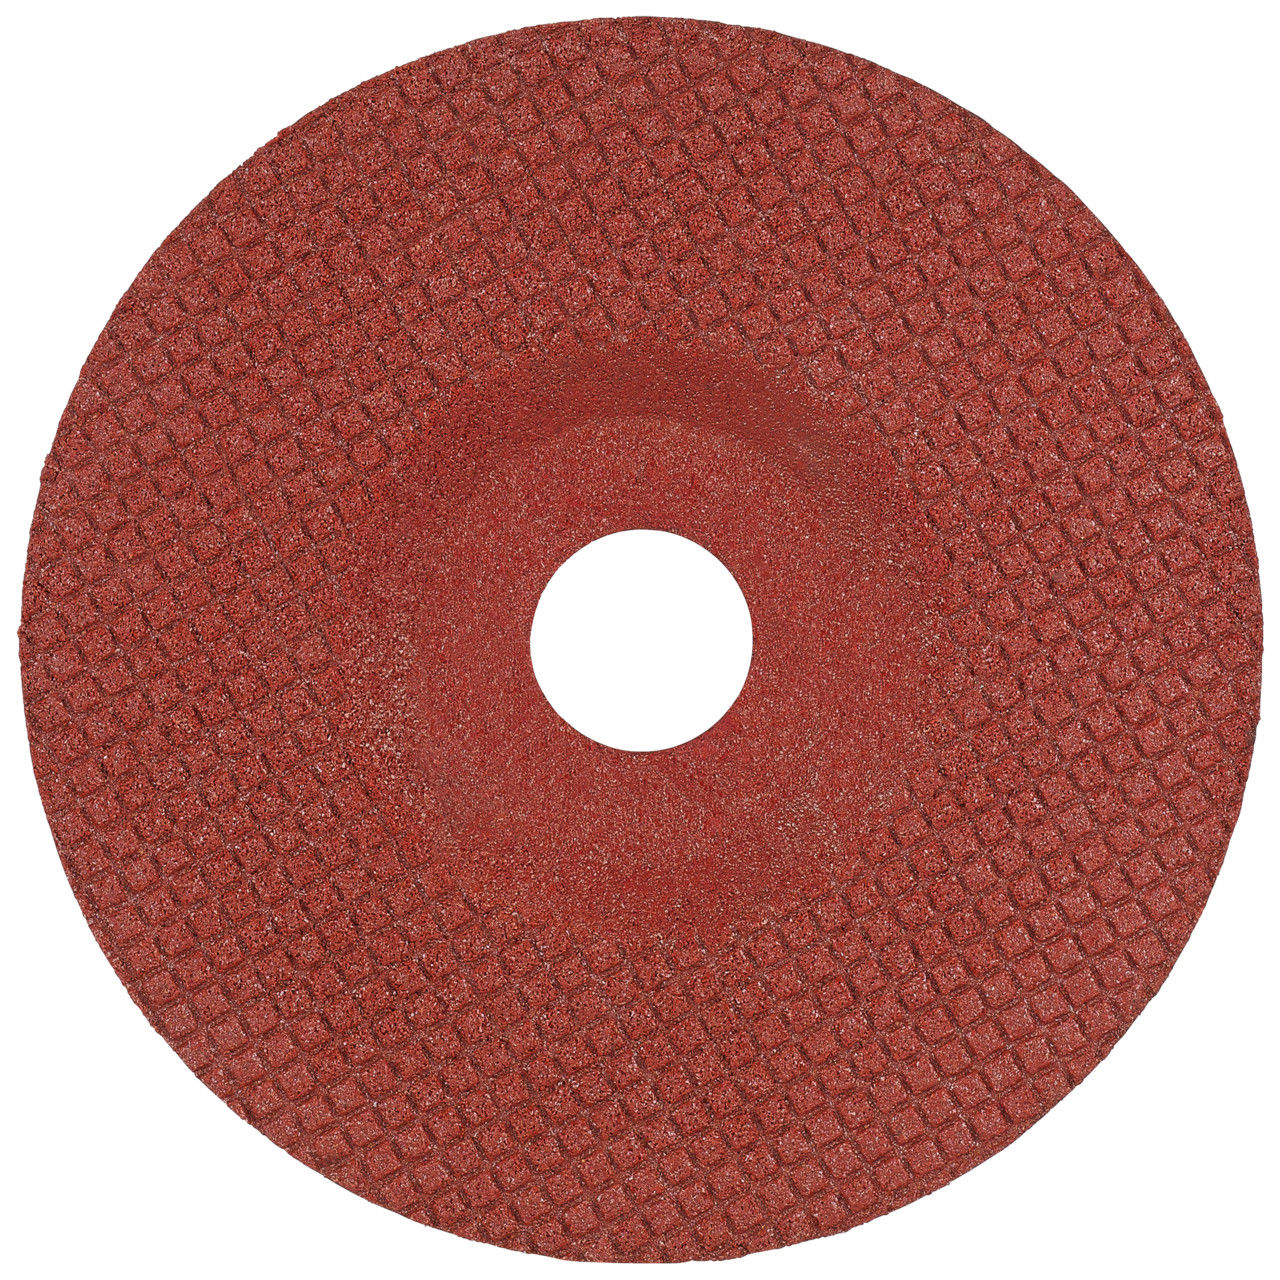 TYROLIT grinding wheel DxH 178x22.23 TOUCH for stainless steel and non-ferrous metals, shape: 29T - offset version, Art. 236320